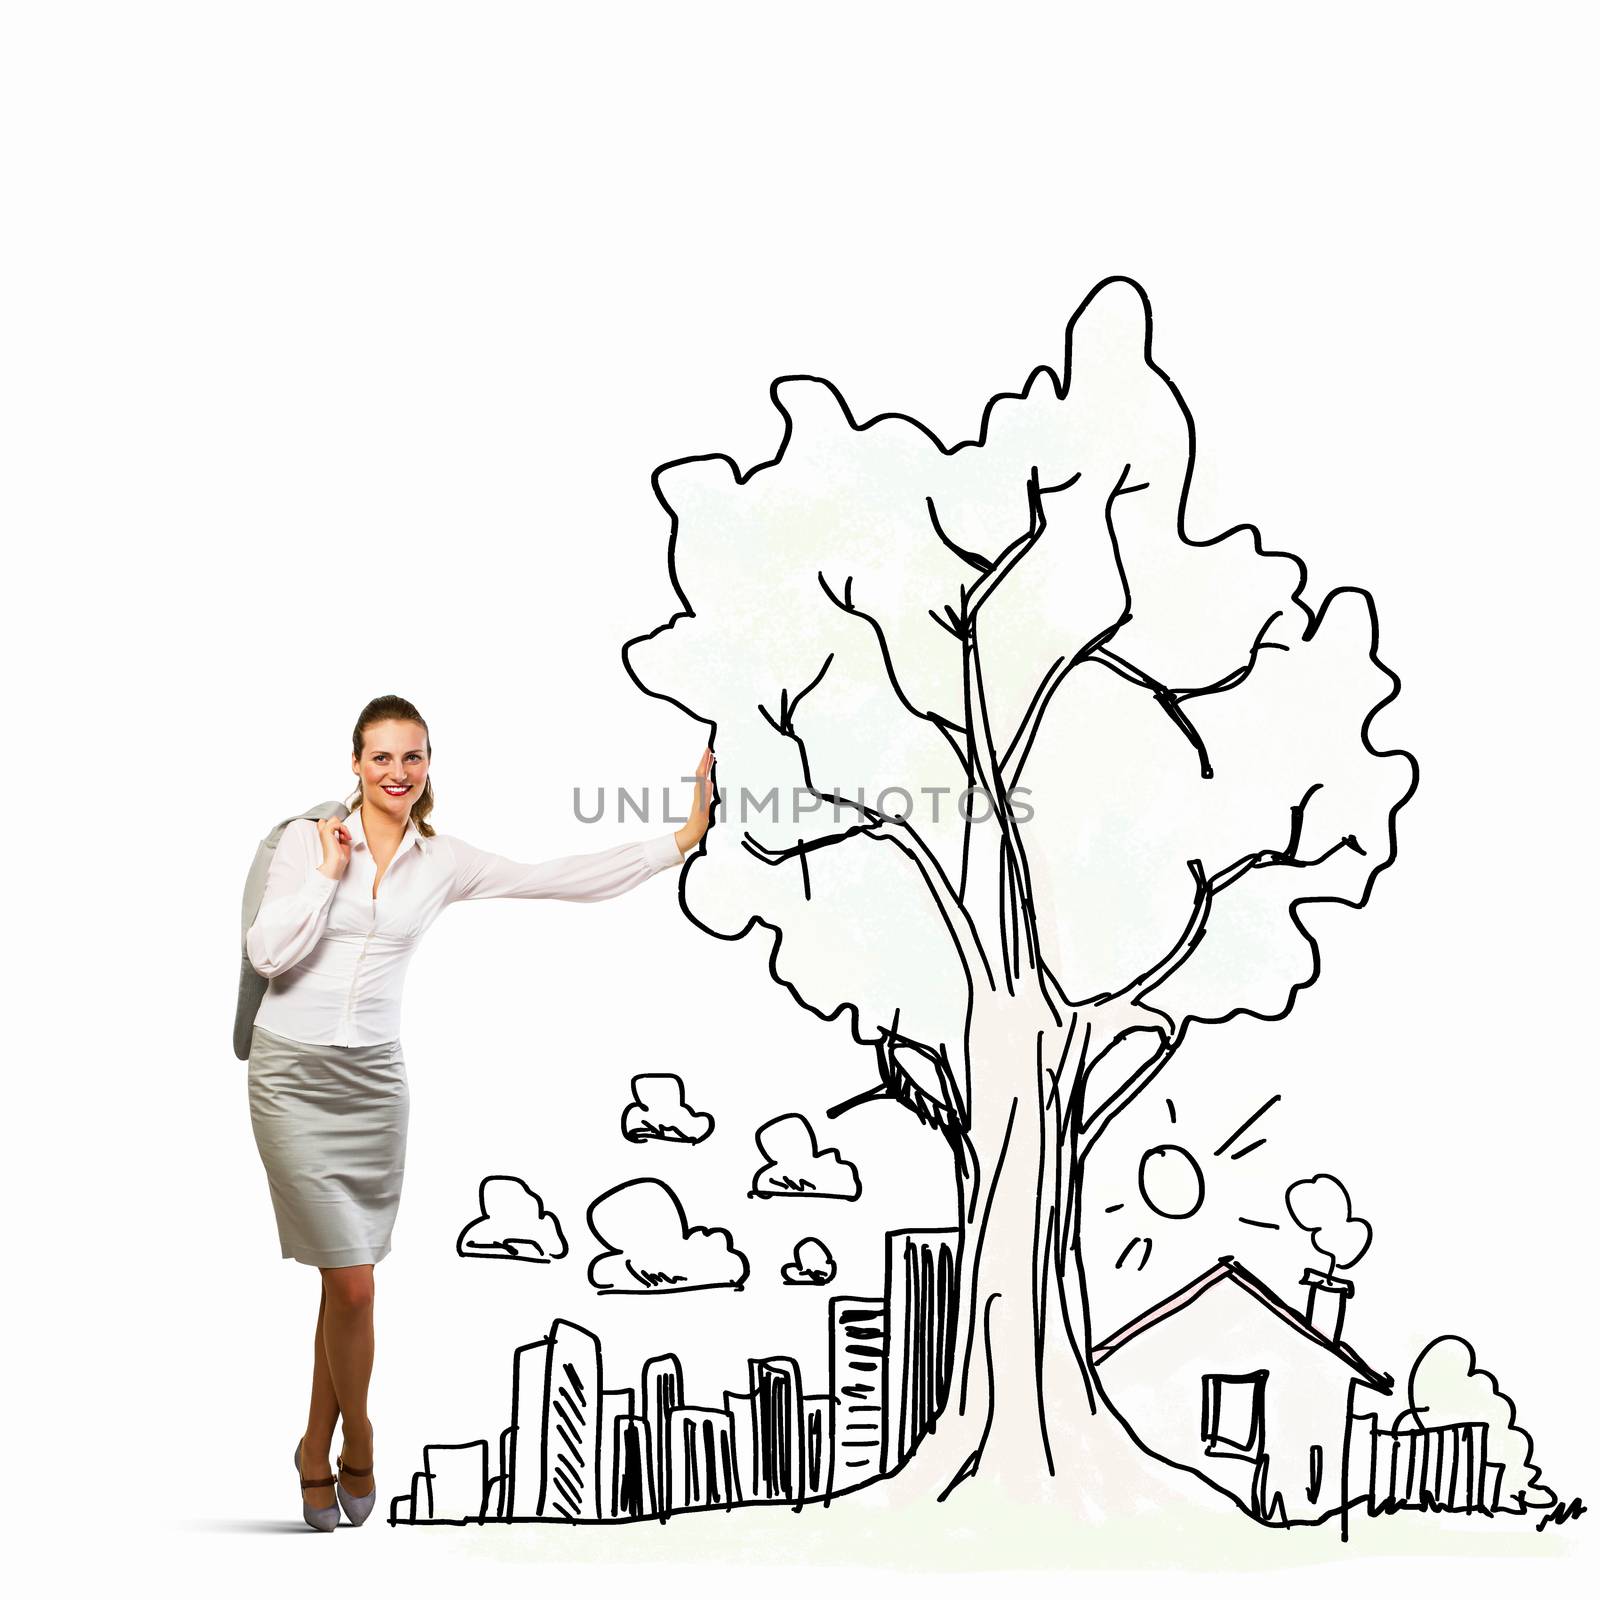 Image of businesswoman leaning on illustration. Construction concept